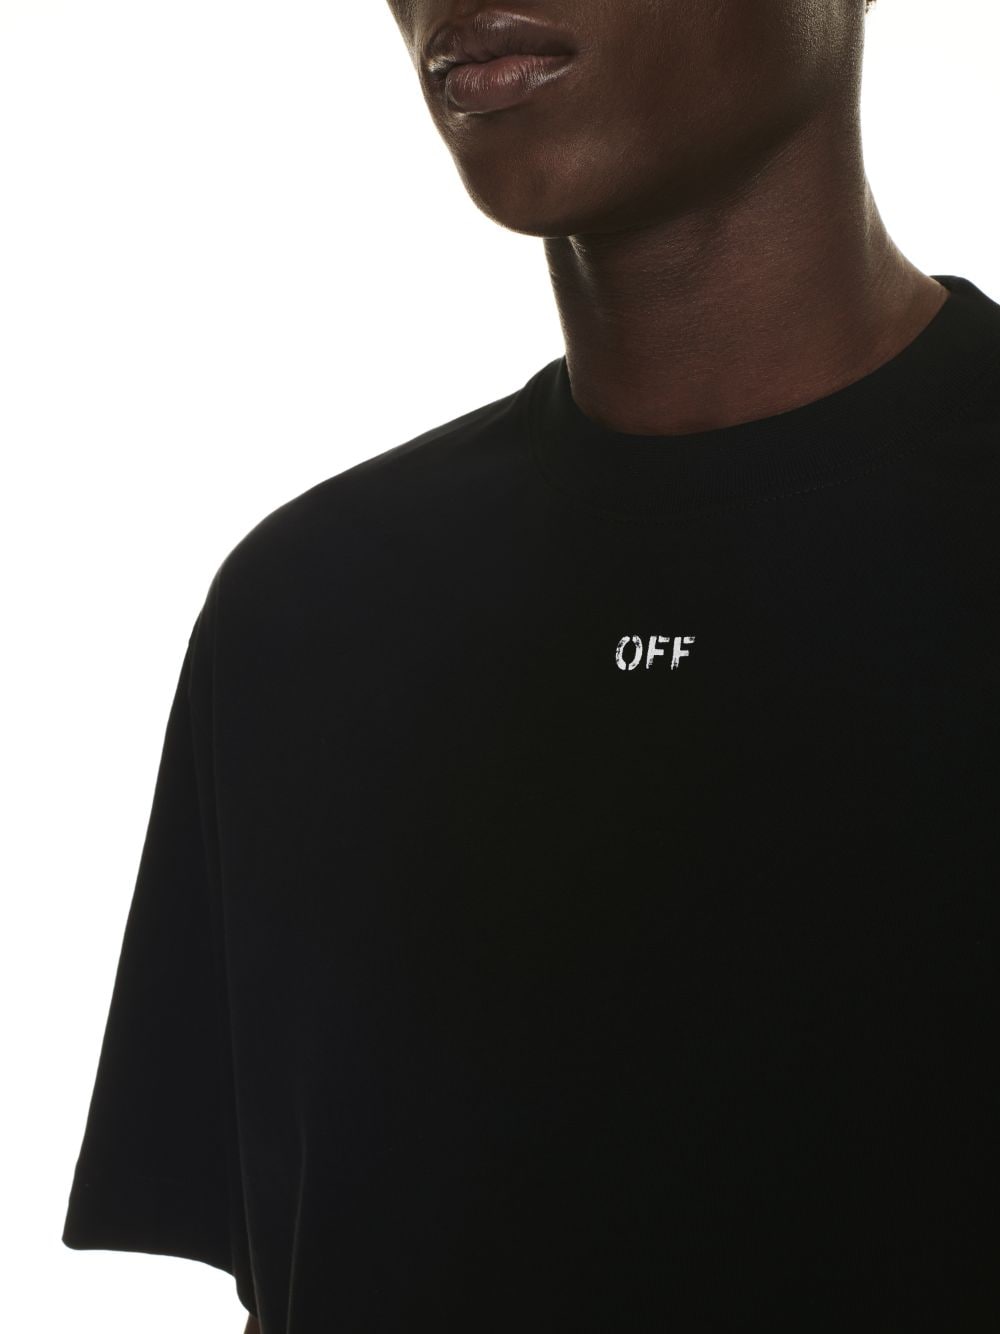 OFF STAMP SKATE S/S TEE in black | Off-White™ Official US